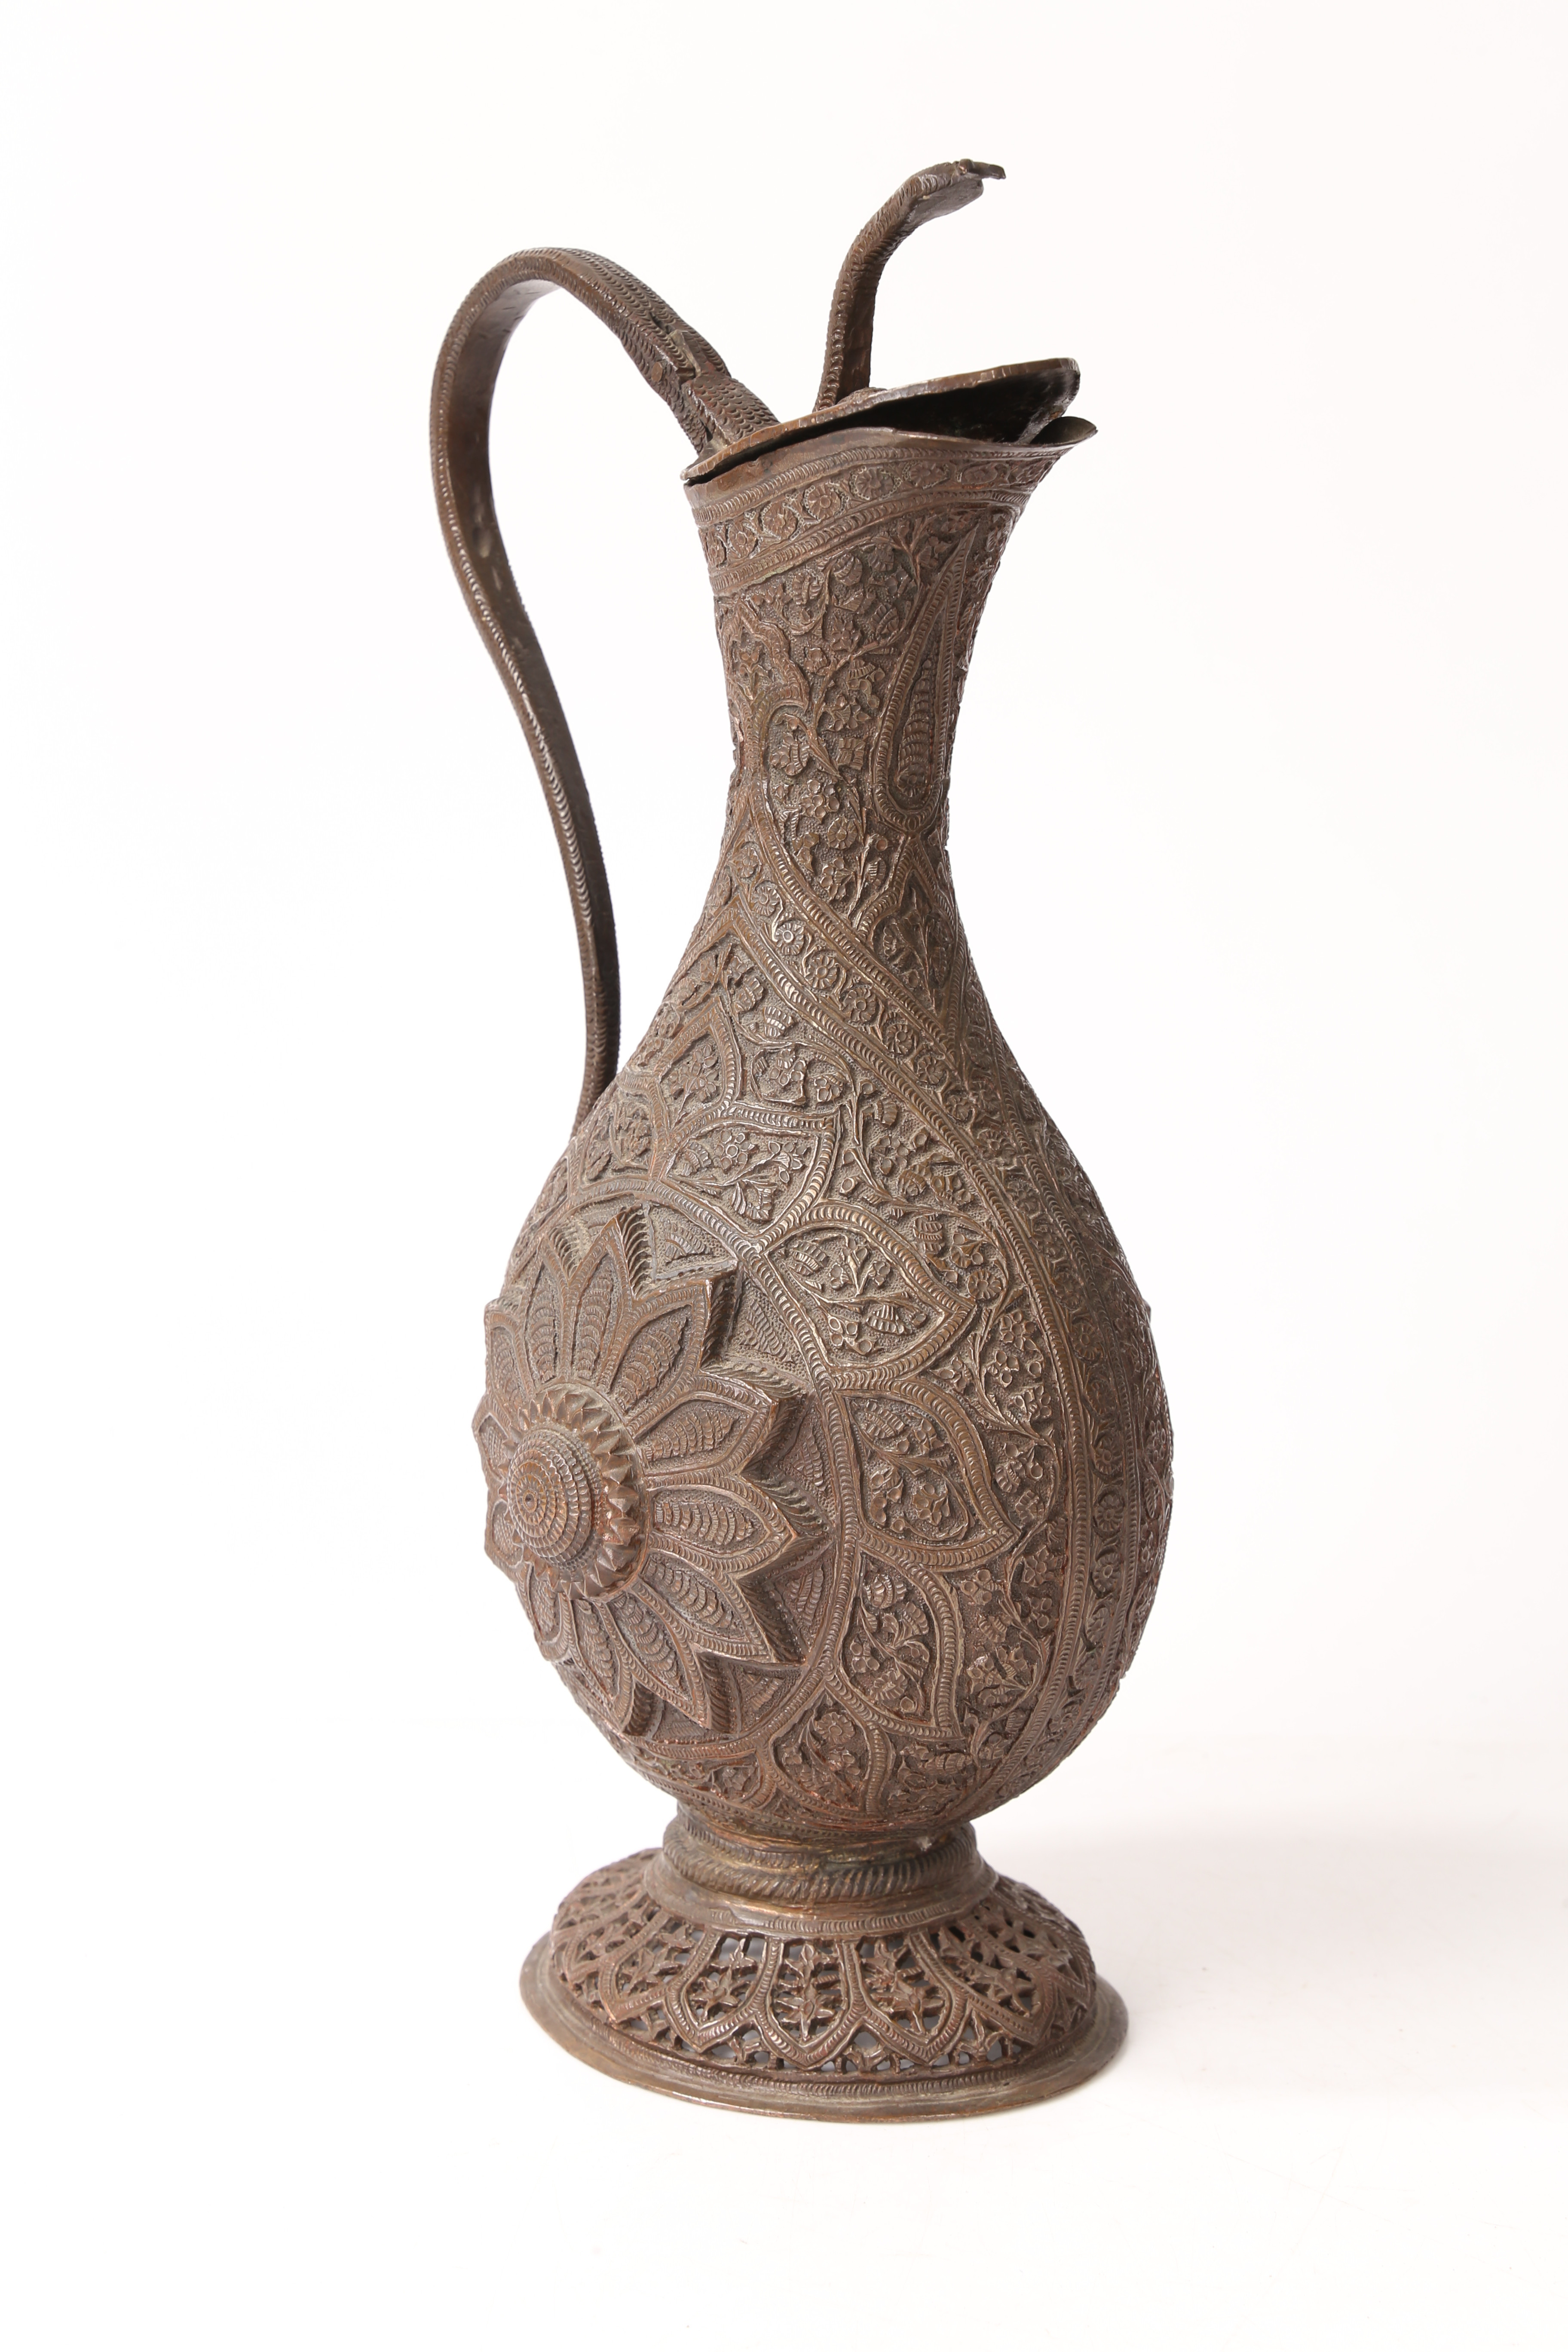 A 19TH CENTURY PERSIAN COPPER EWER. - Image 7 of 11